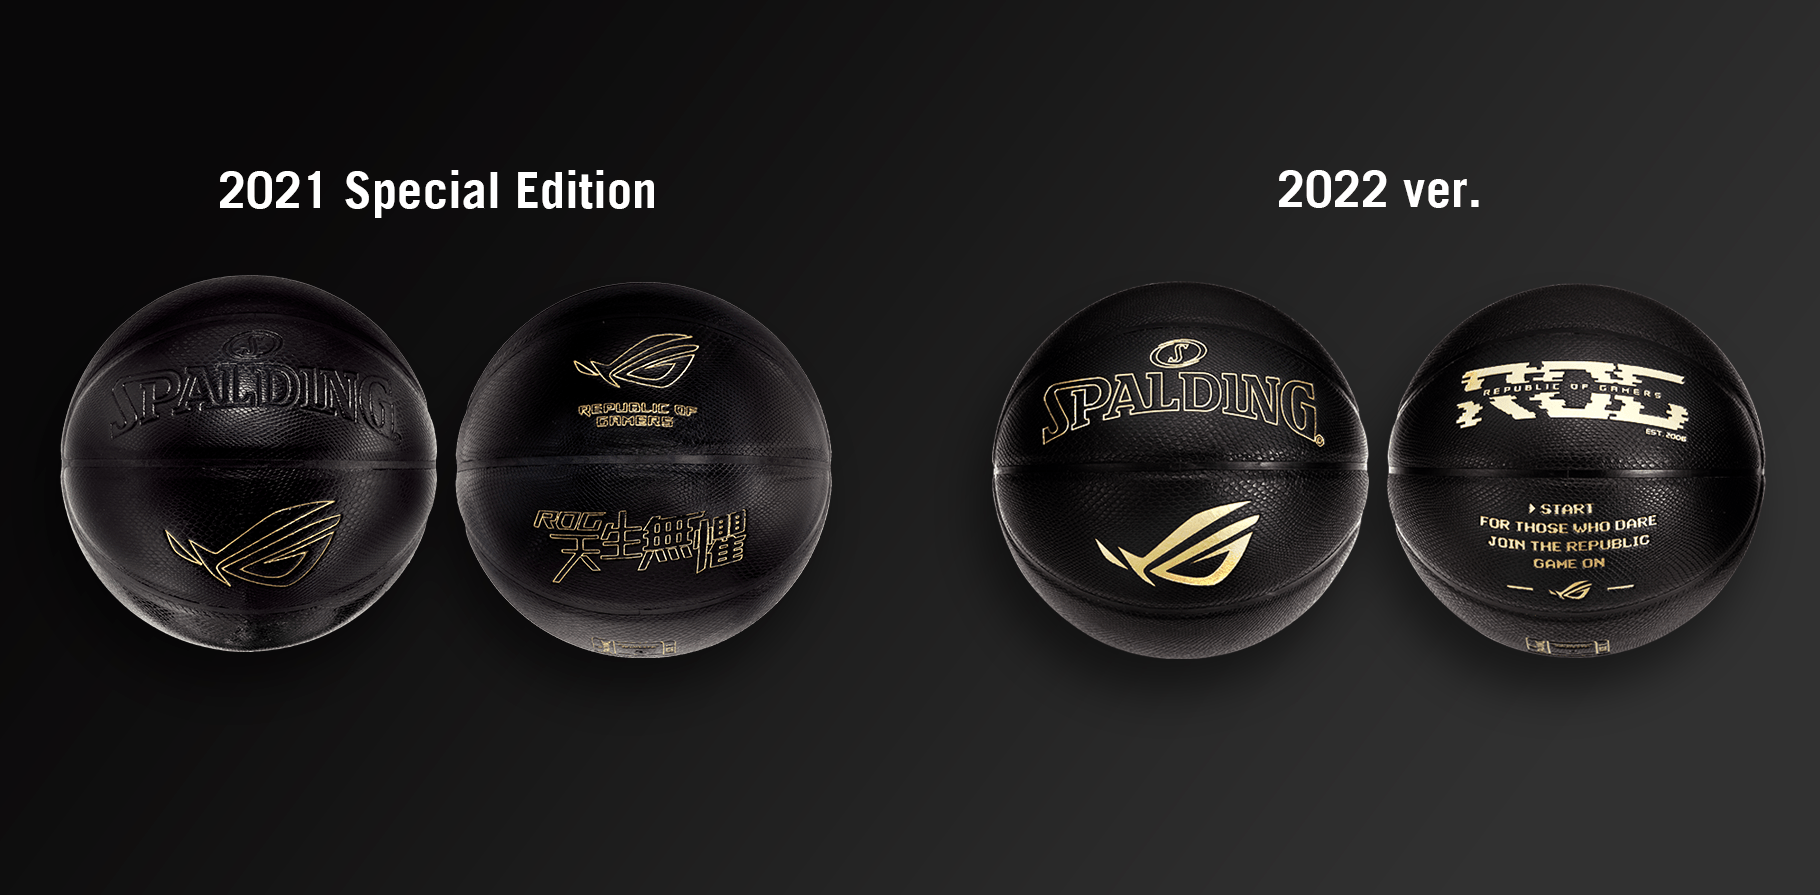 On the left is an ROG x Spalding Basketball 2021 special version, and the right is the ROG x Spalding Basketball 2022 version.